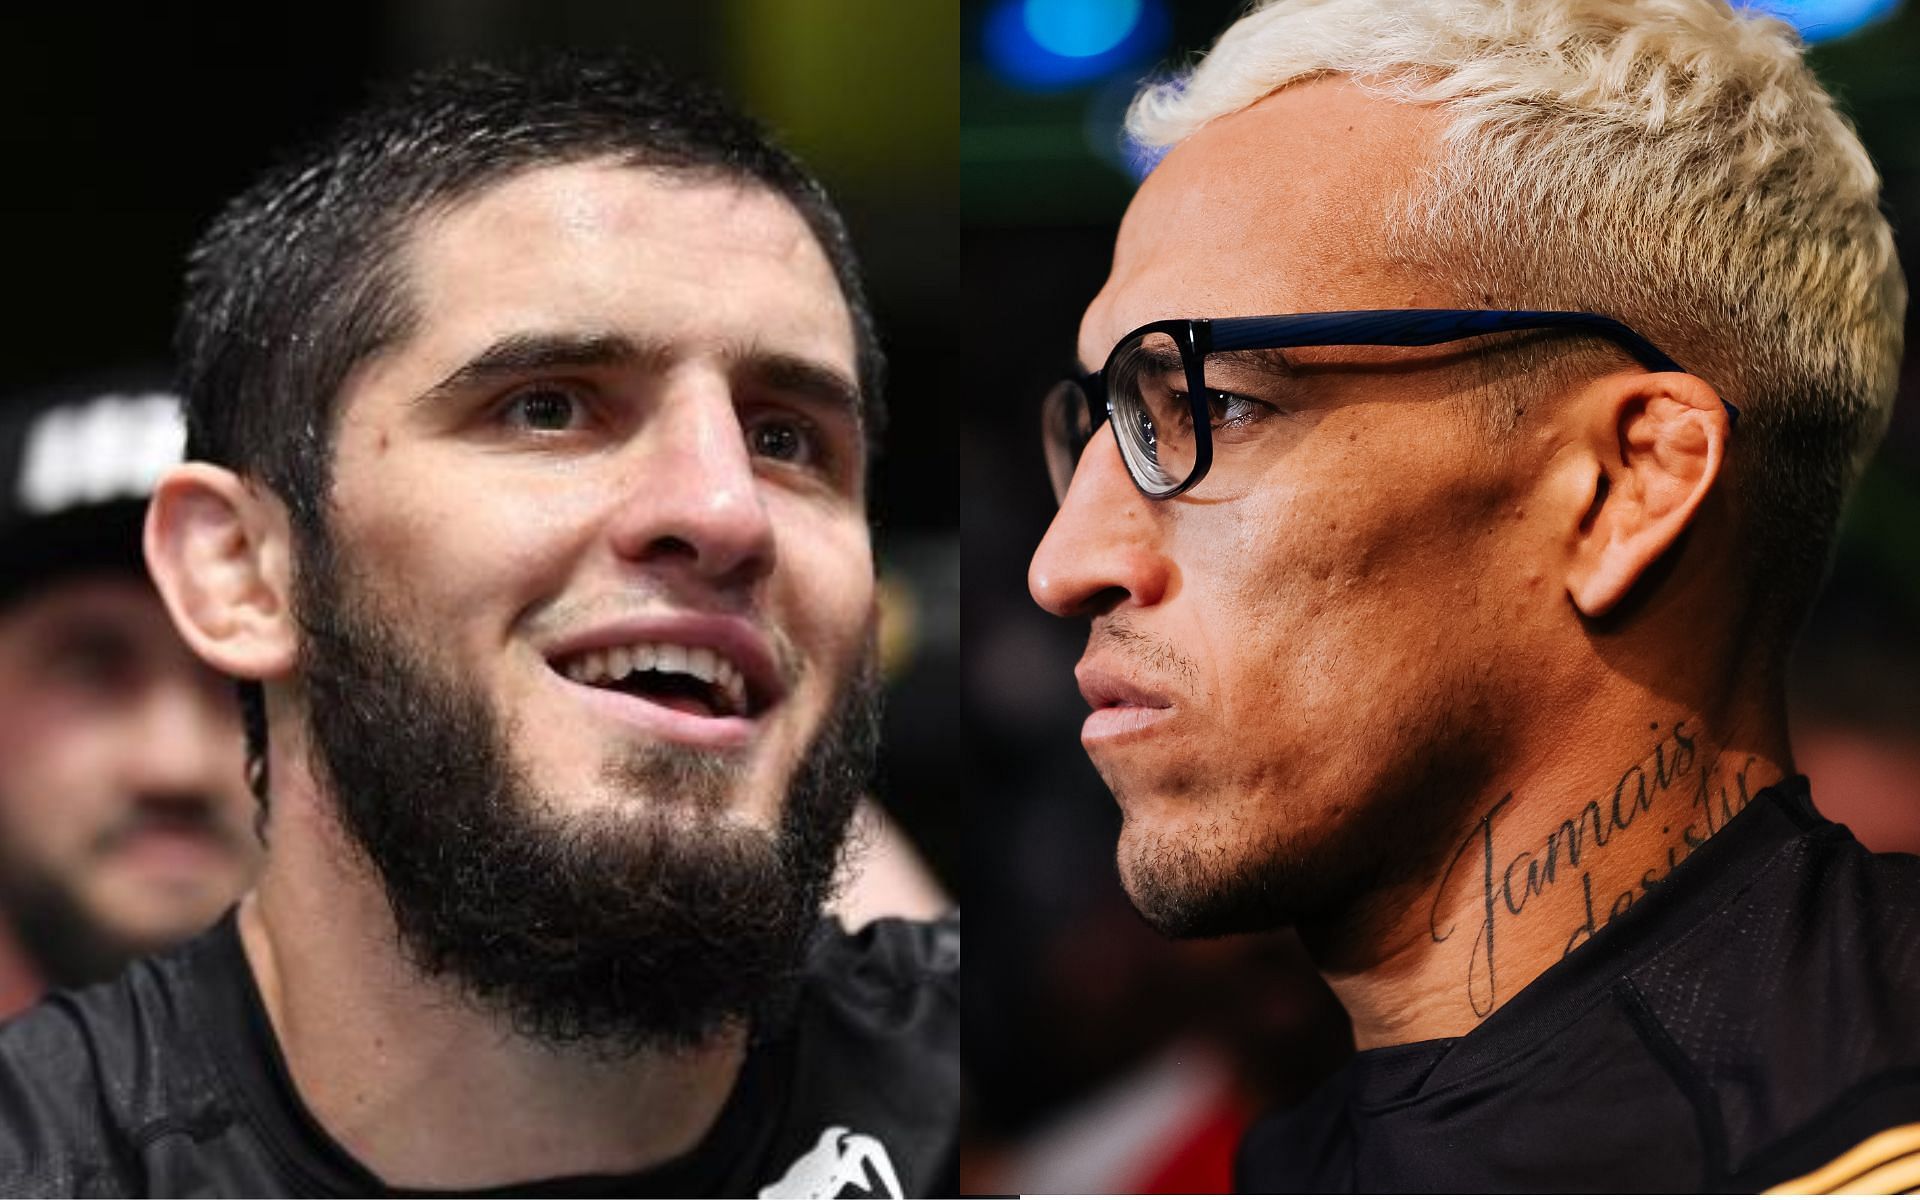 Islam Makhachev (left), and Charles Oliveira (right). [Images courtesy: left image from UFC, right image from Getty Images]